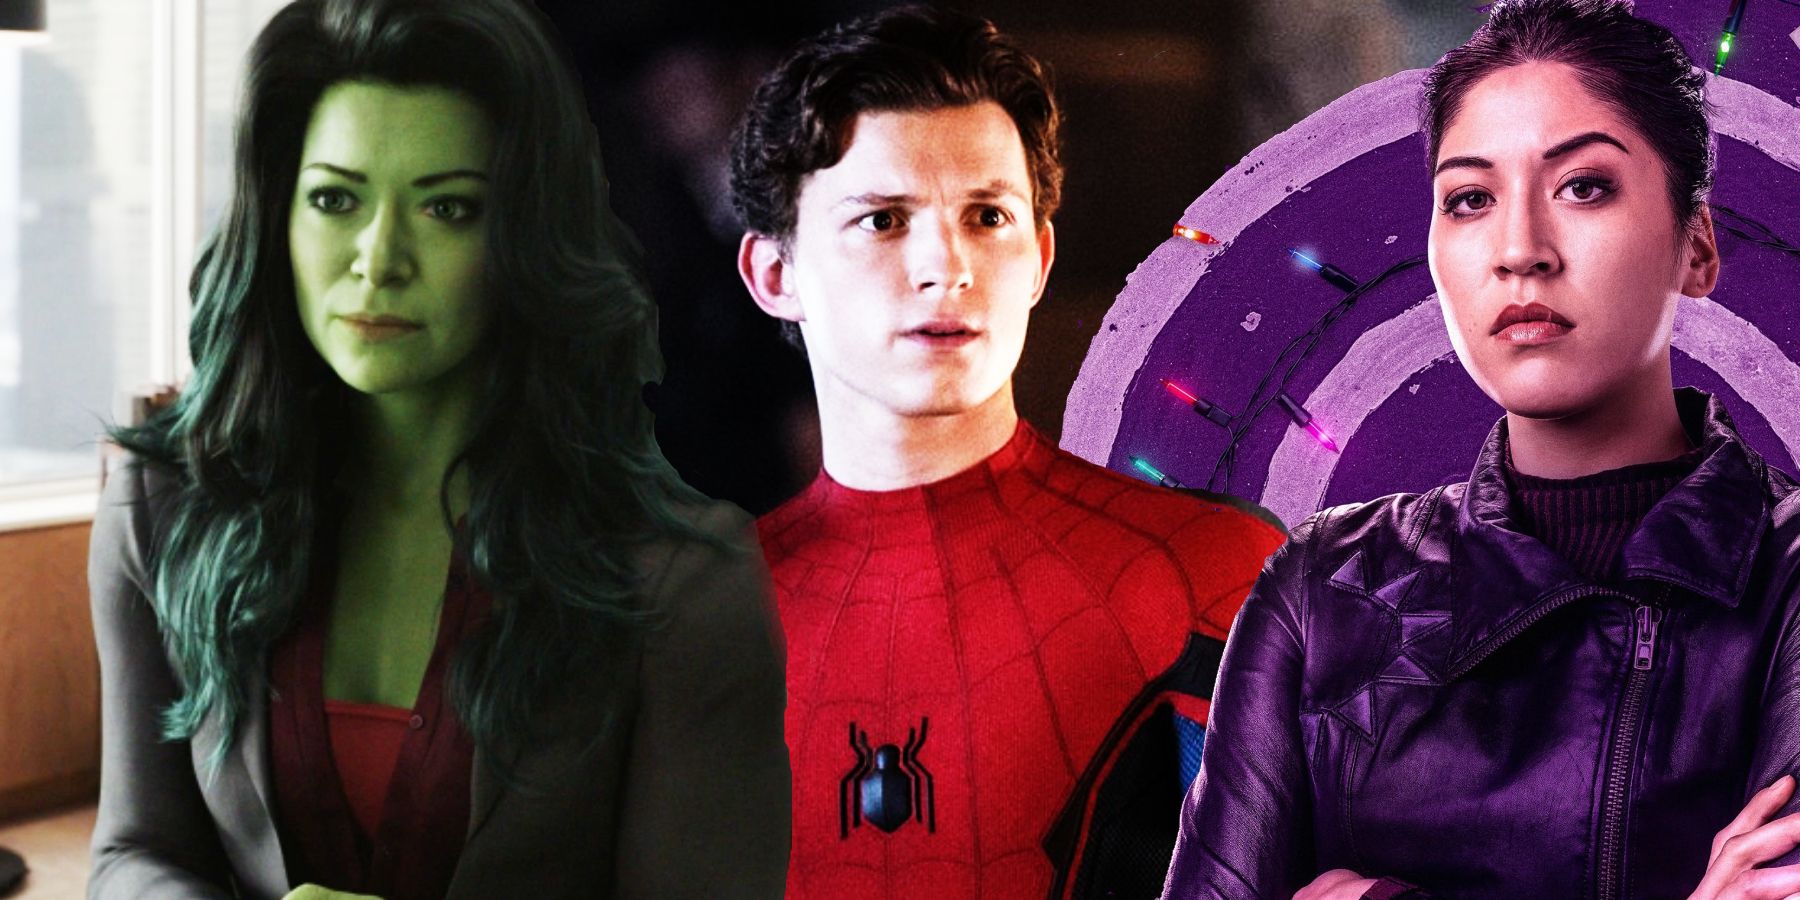 She-Hulk, Spider-Man, and Echo have all met Daredevil in the MCU